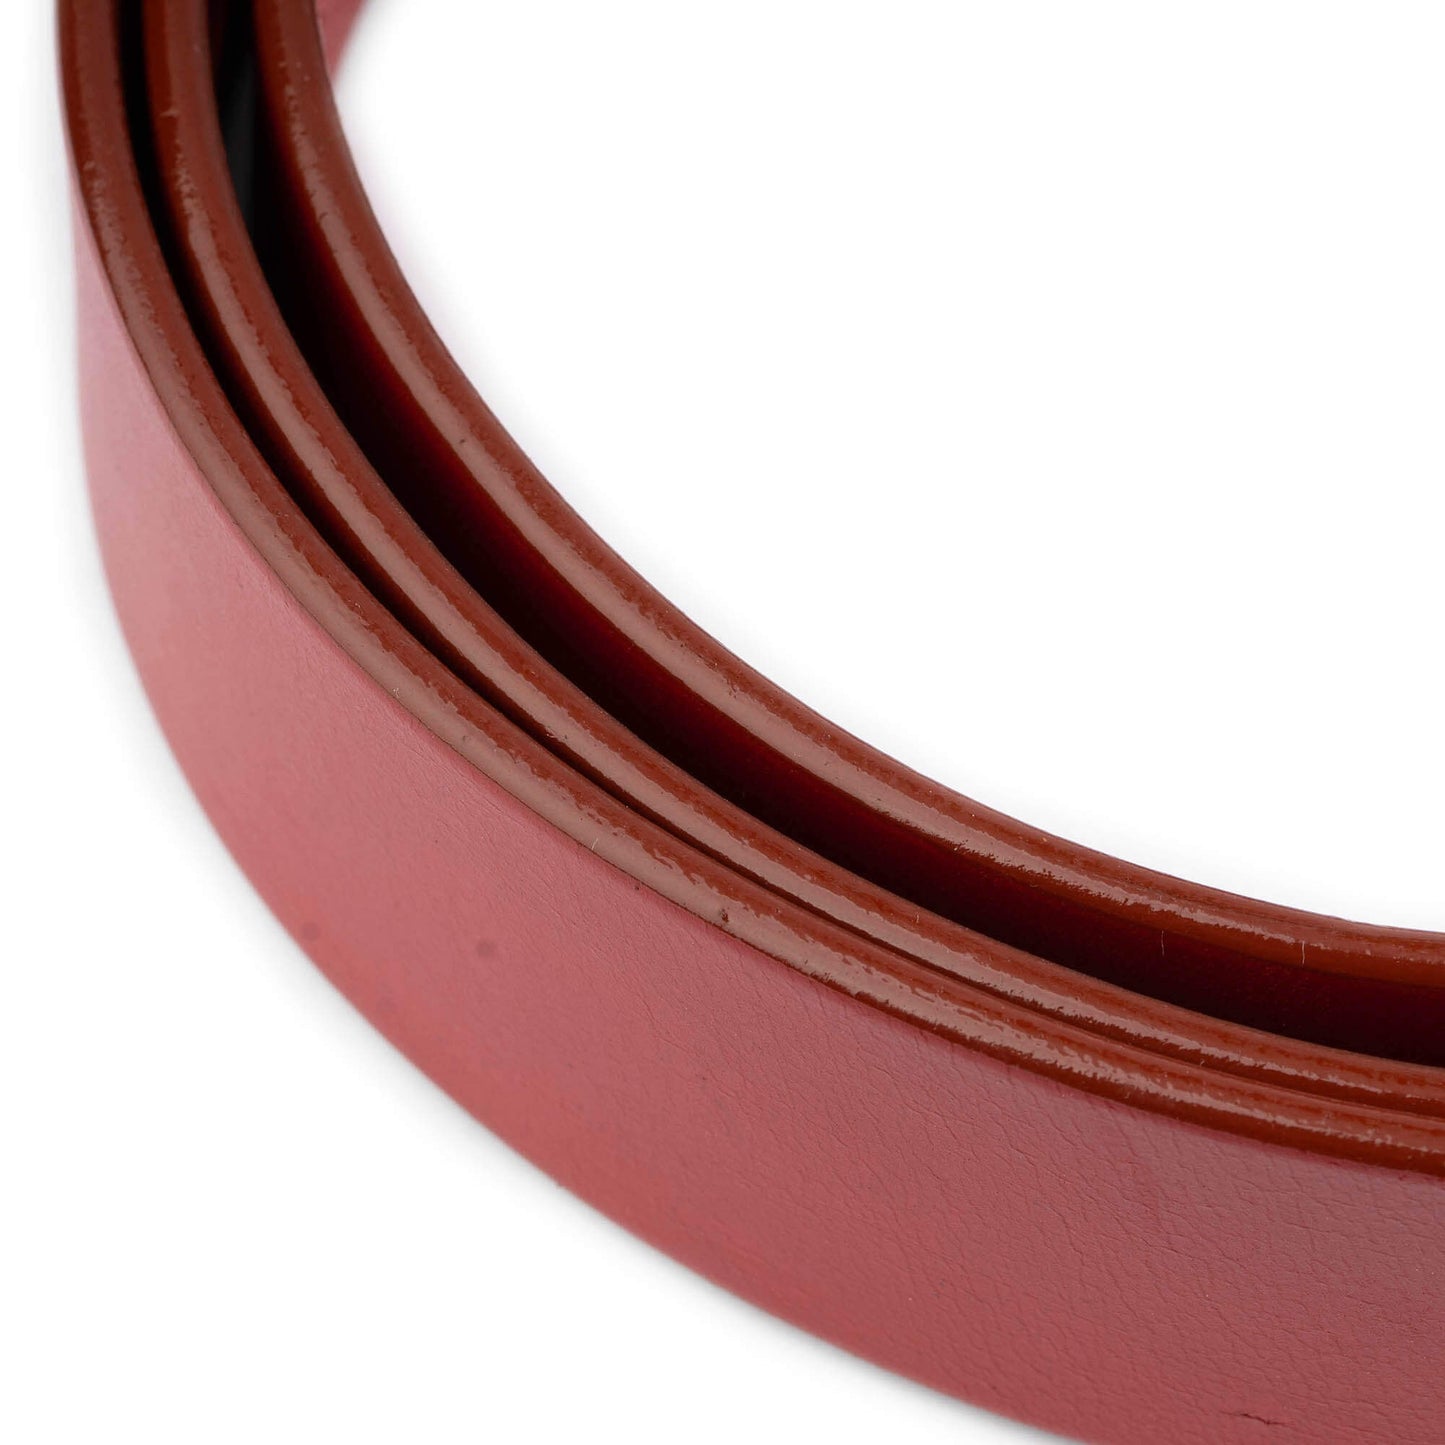 Mens 4.0 cm Red Leather Belt Strap For Ferragamo Buckles Replacement Top Quality